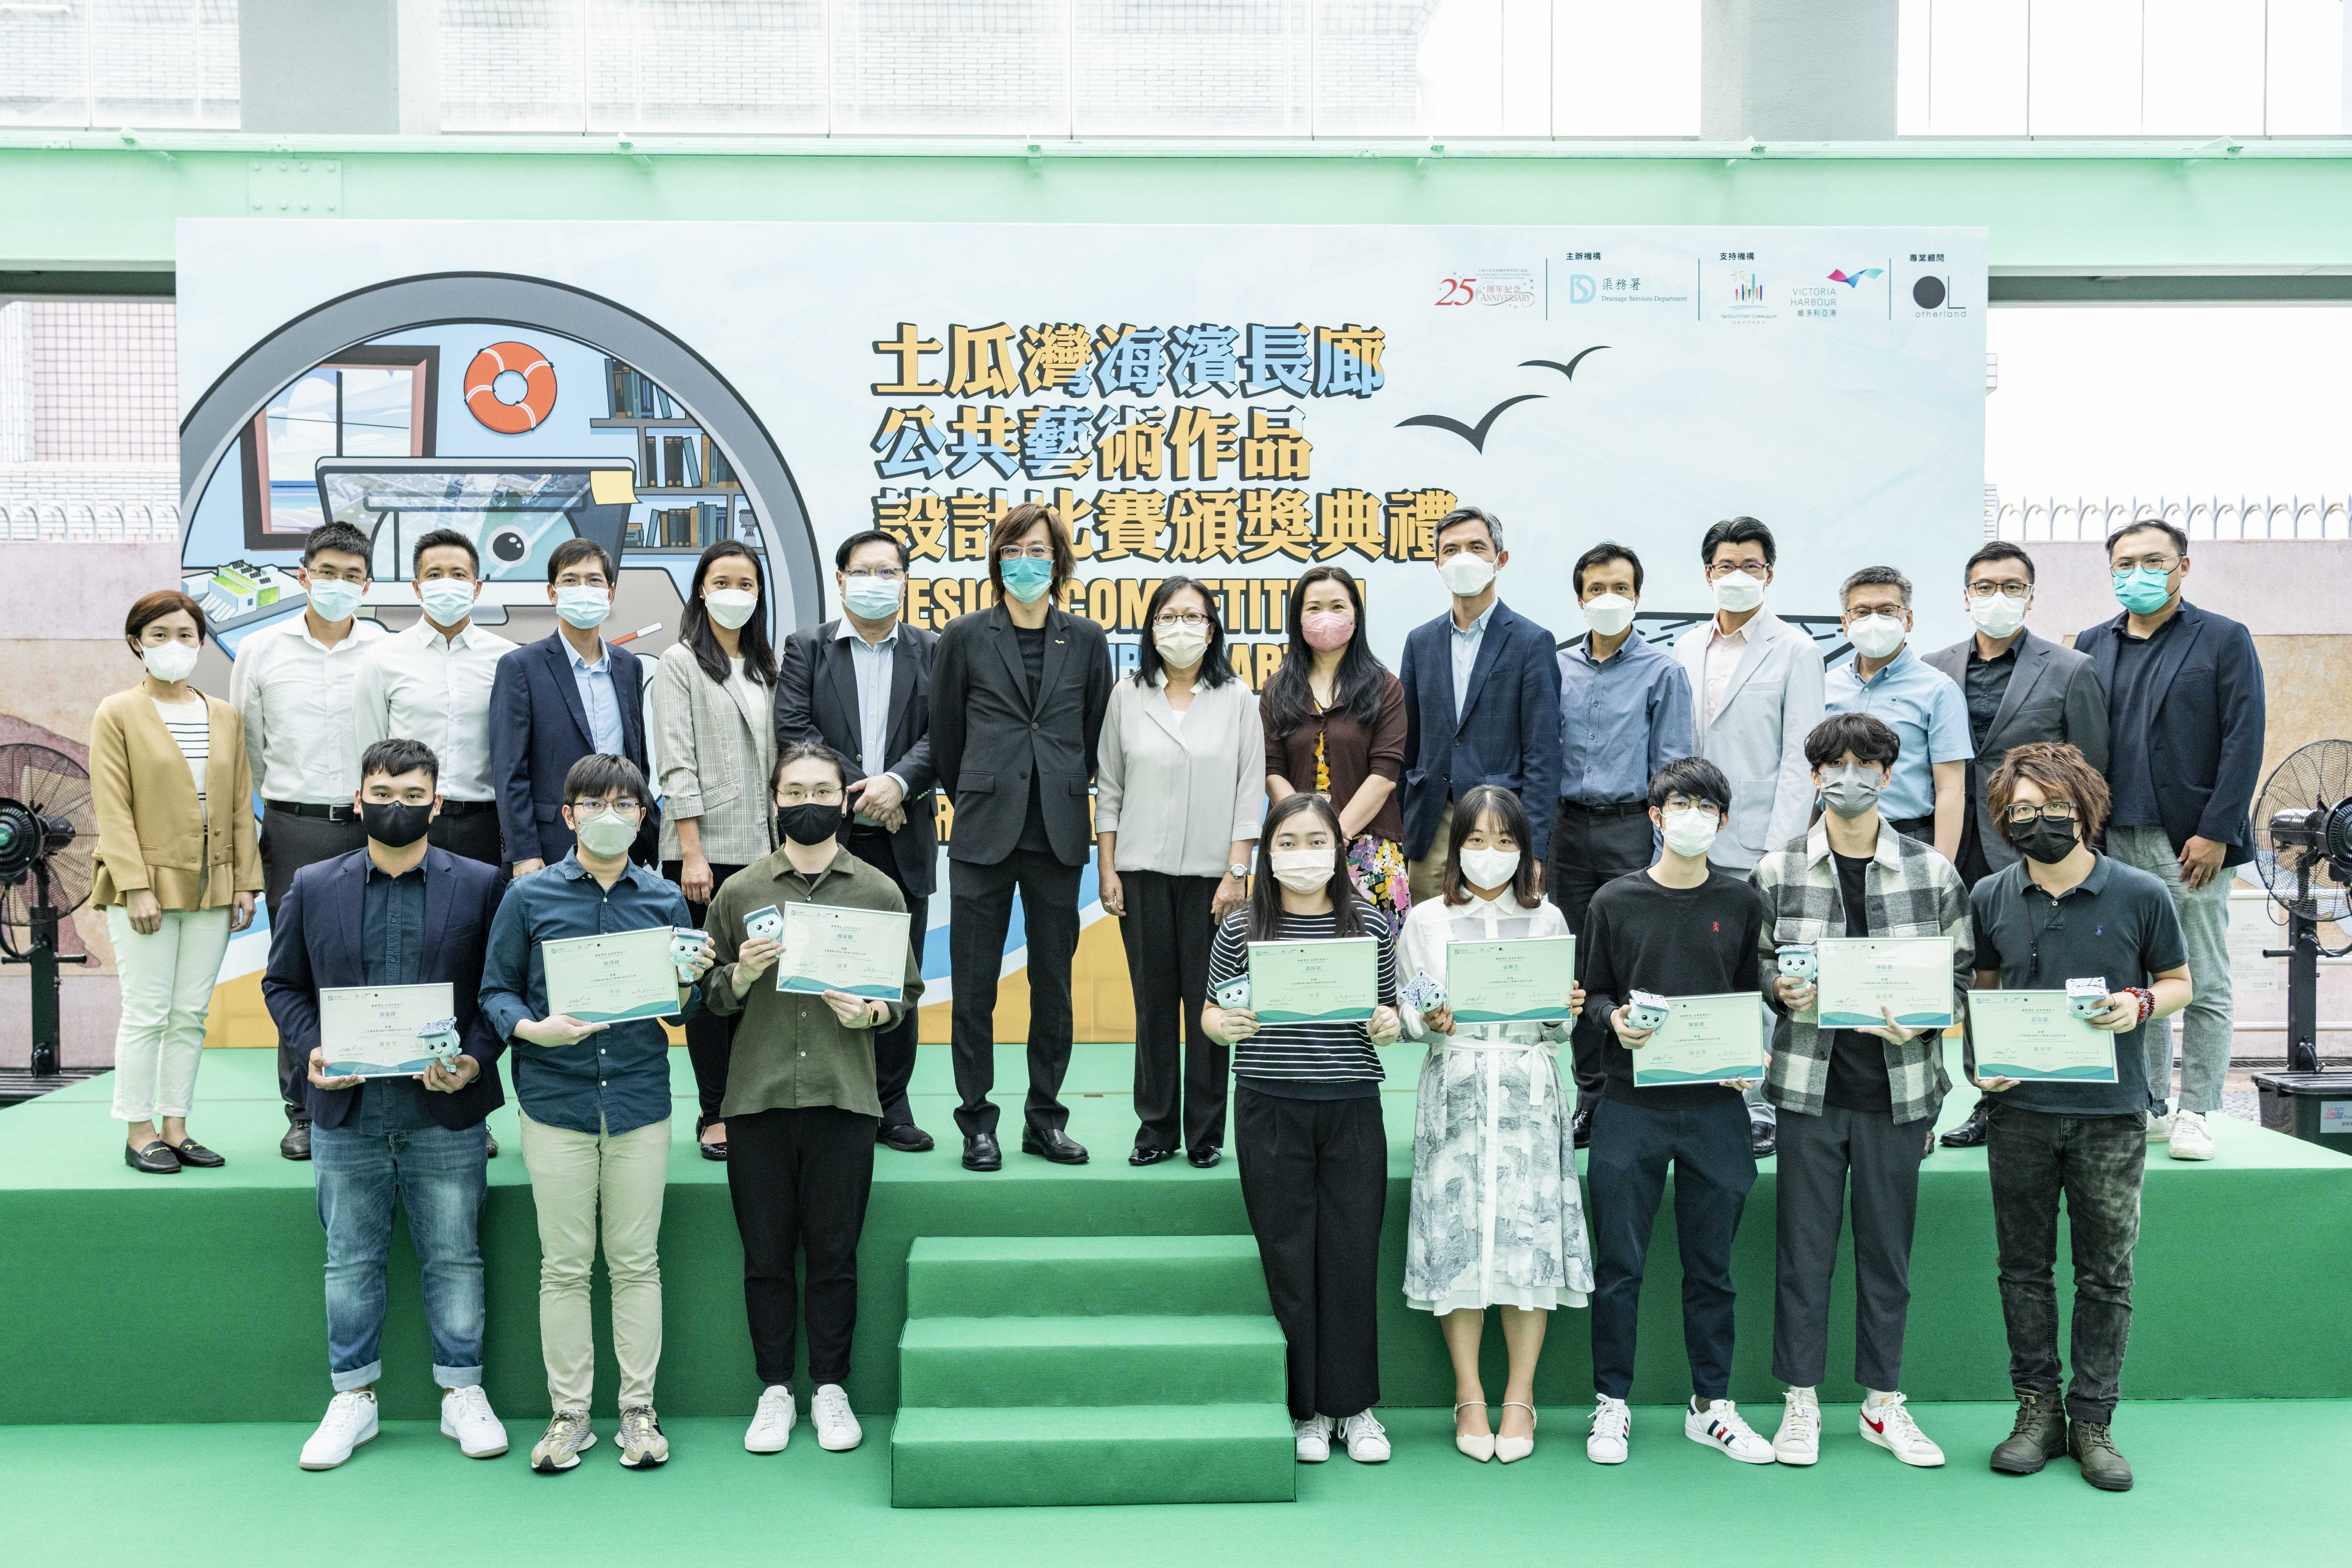 Photo of VIPs of the Award Presentation Ceremony (back) and prize winners (front)